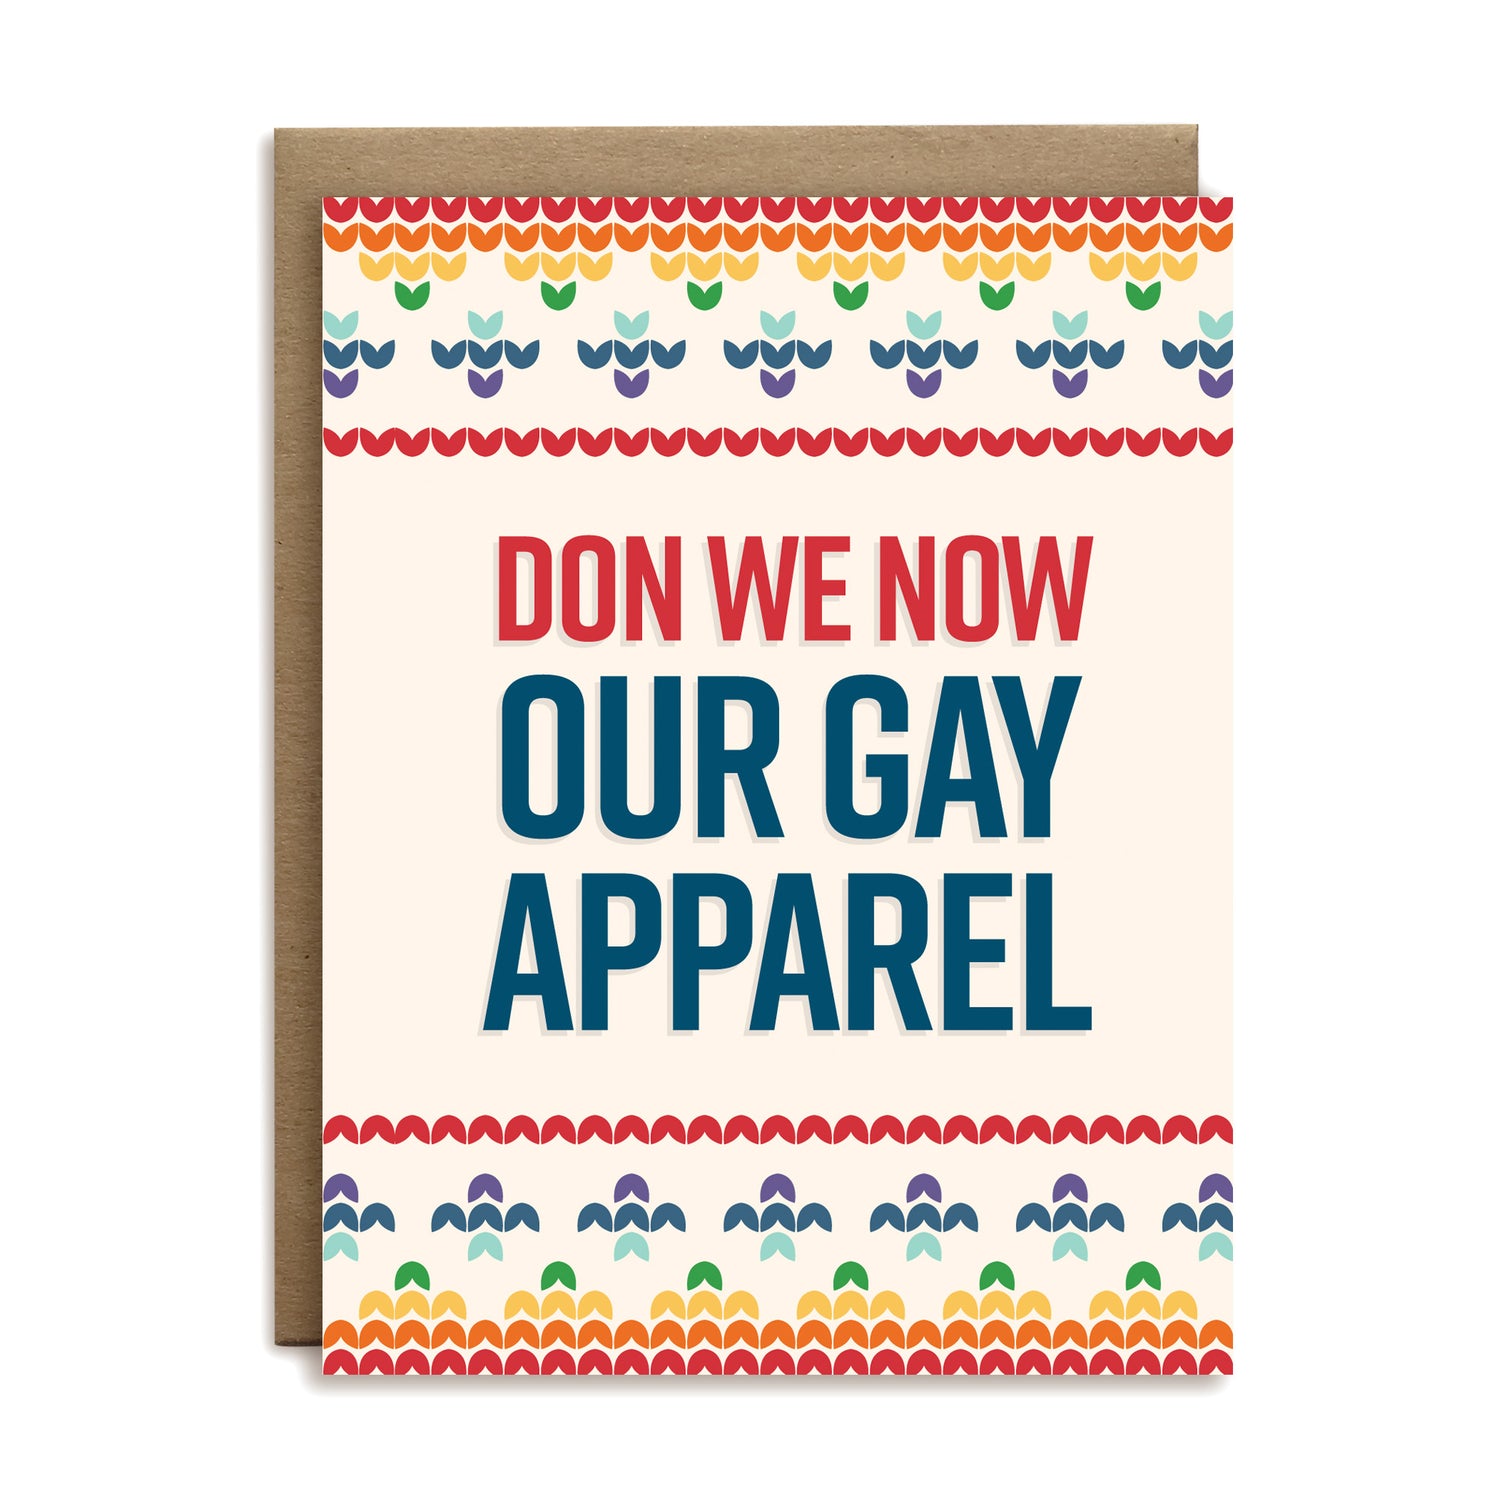 Don we now our gay apparel Christmas greeting card by I’ll Know It When I See It